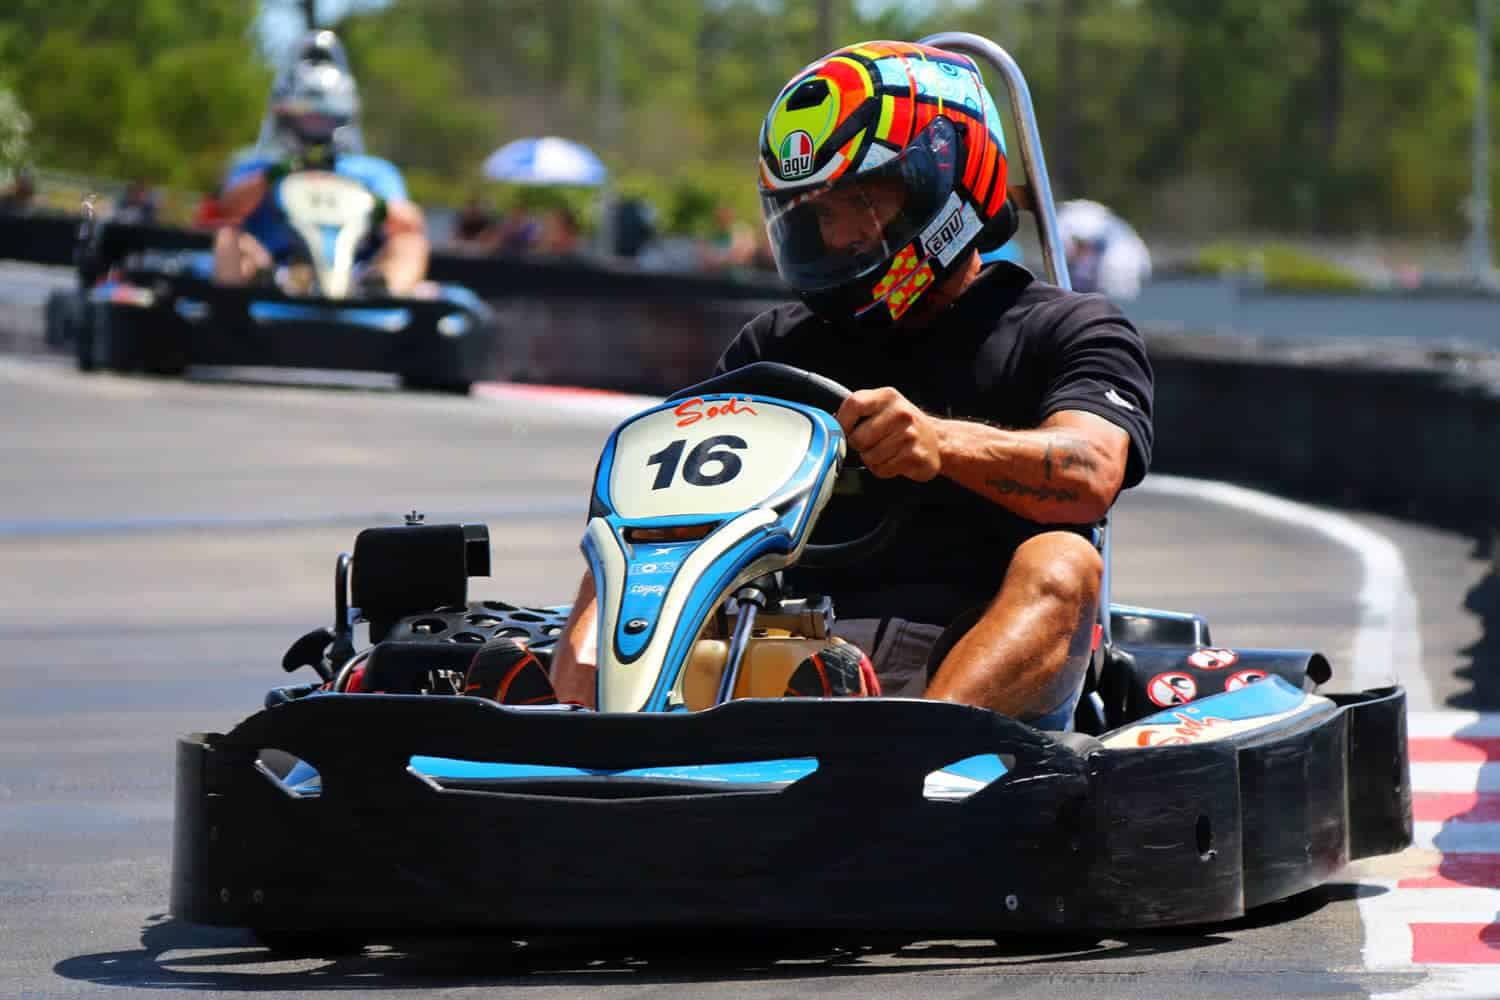 Go karts racing on our Pimpama track